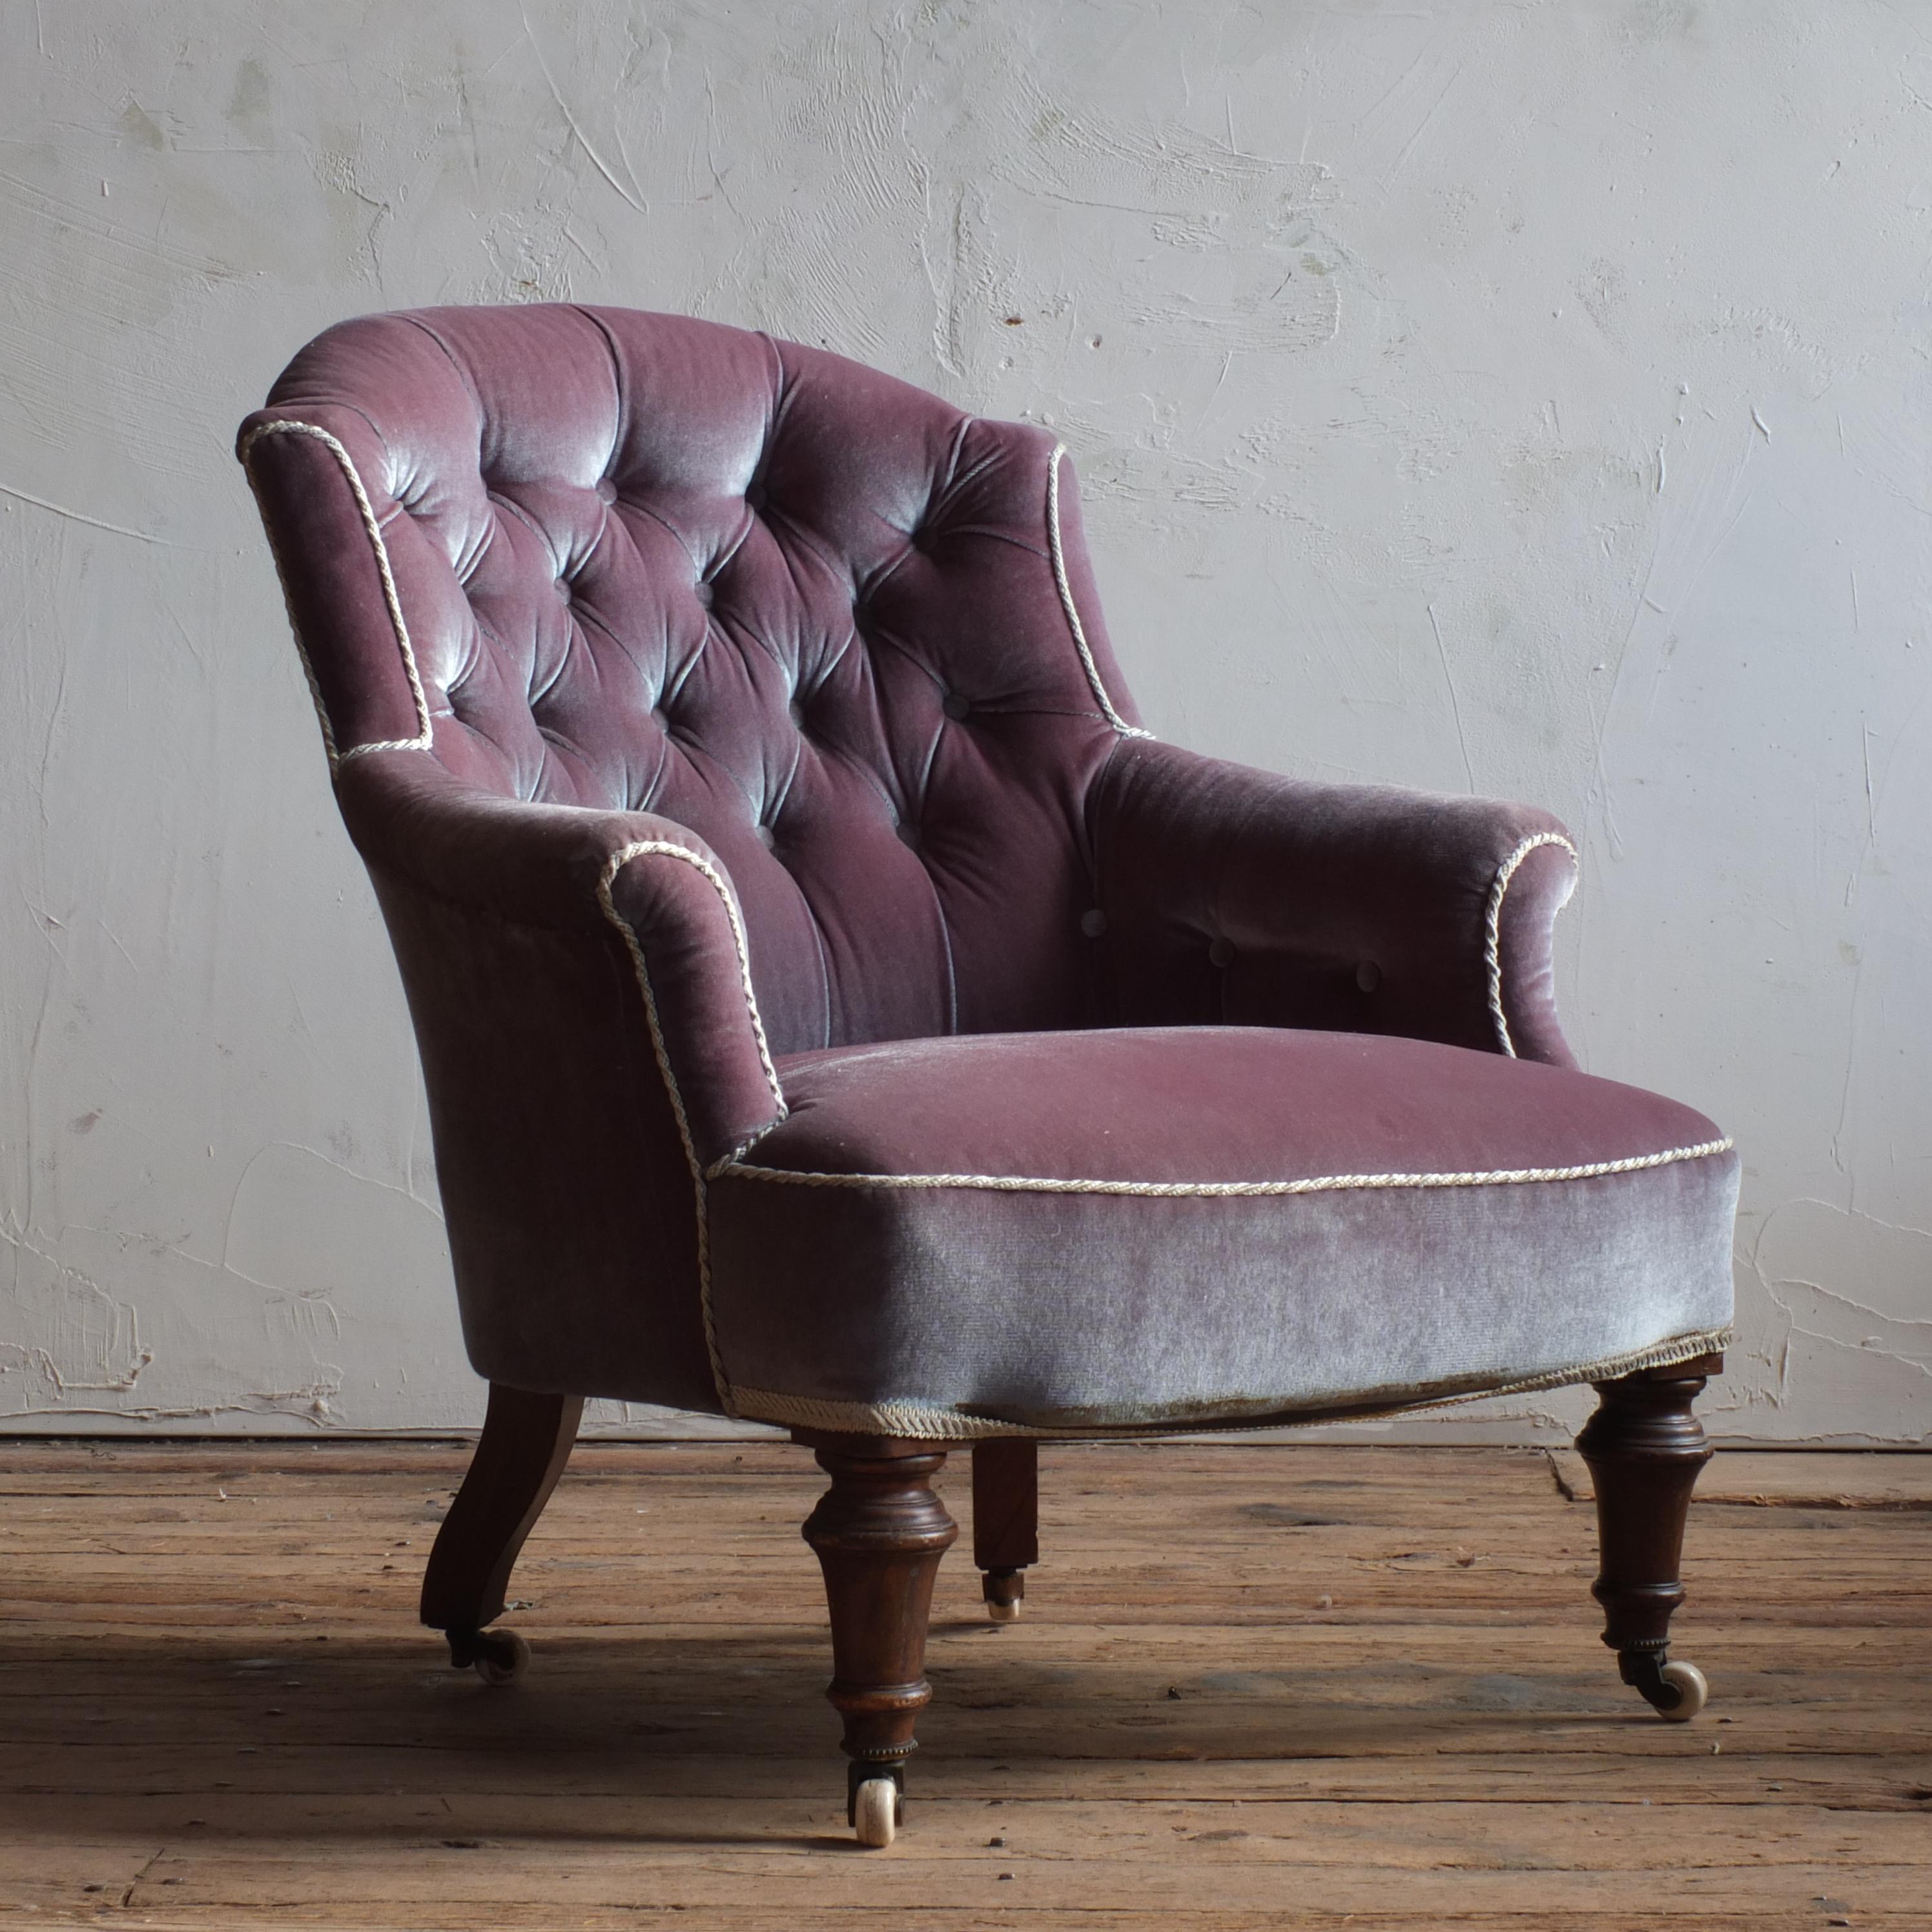 A good quality 19th century armchair raised on mahogany turned legs with the original white ceramic Cope & Collinson casters. In good structural condition but would benefit from upholstery. The upholstery is clean and very much usable though should